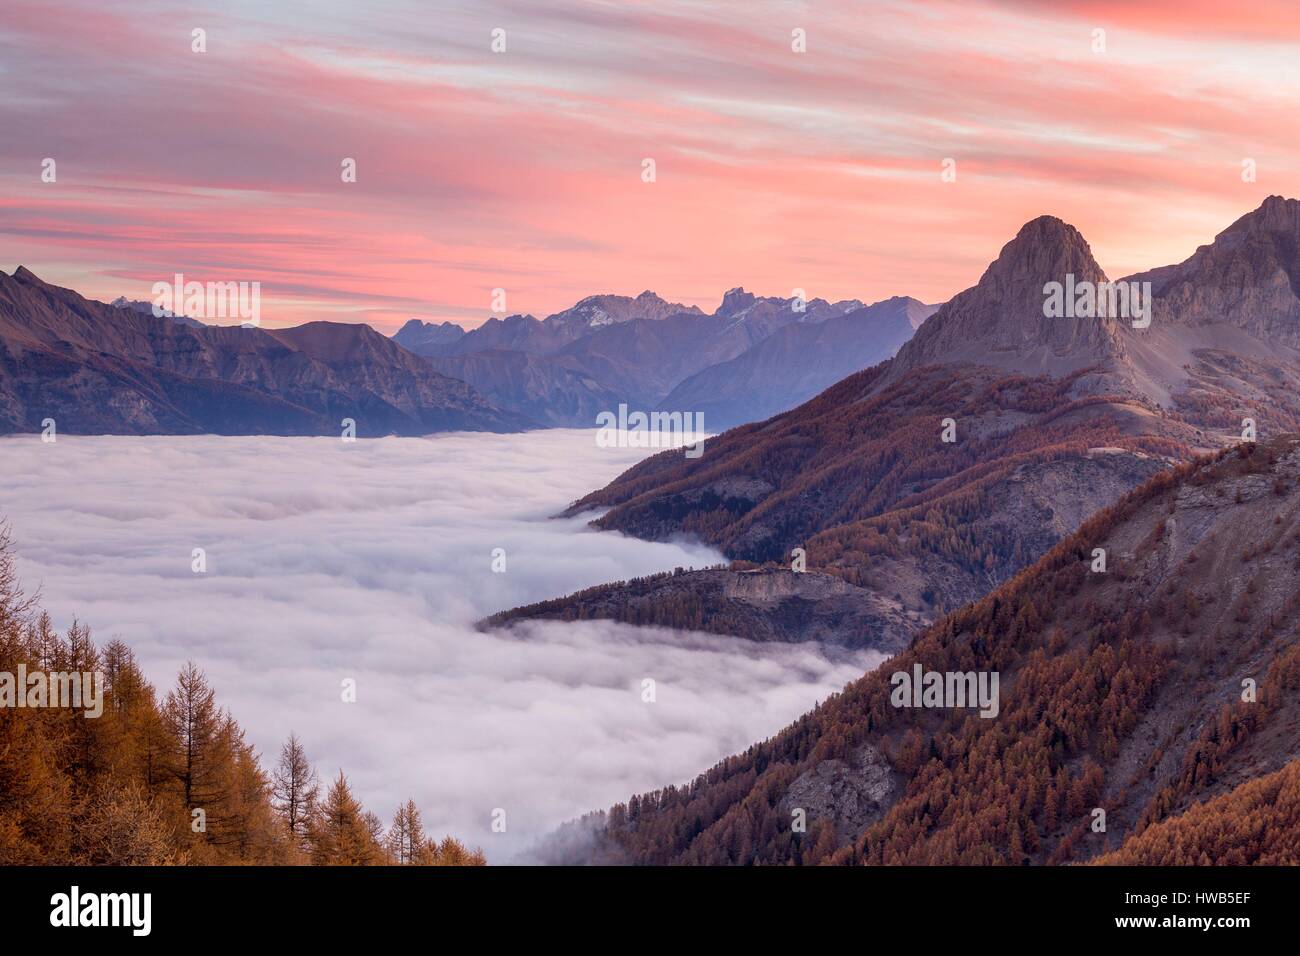 France, Alpes de Haute-Provence, national park of Mercantour, fog morning over the valley of Barcelonnette, to the right the summit of the Pain de Sucre (2560m) Stock Photo